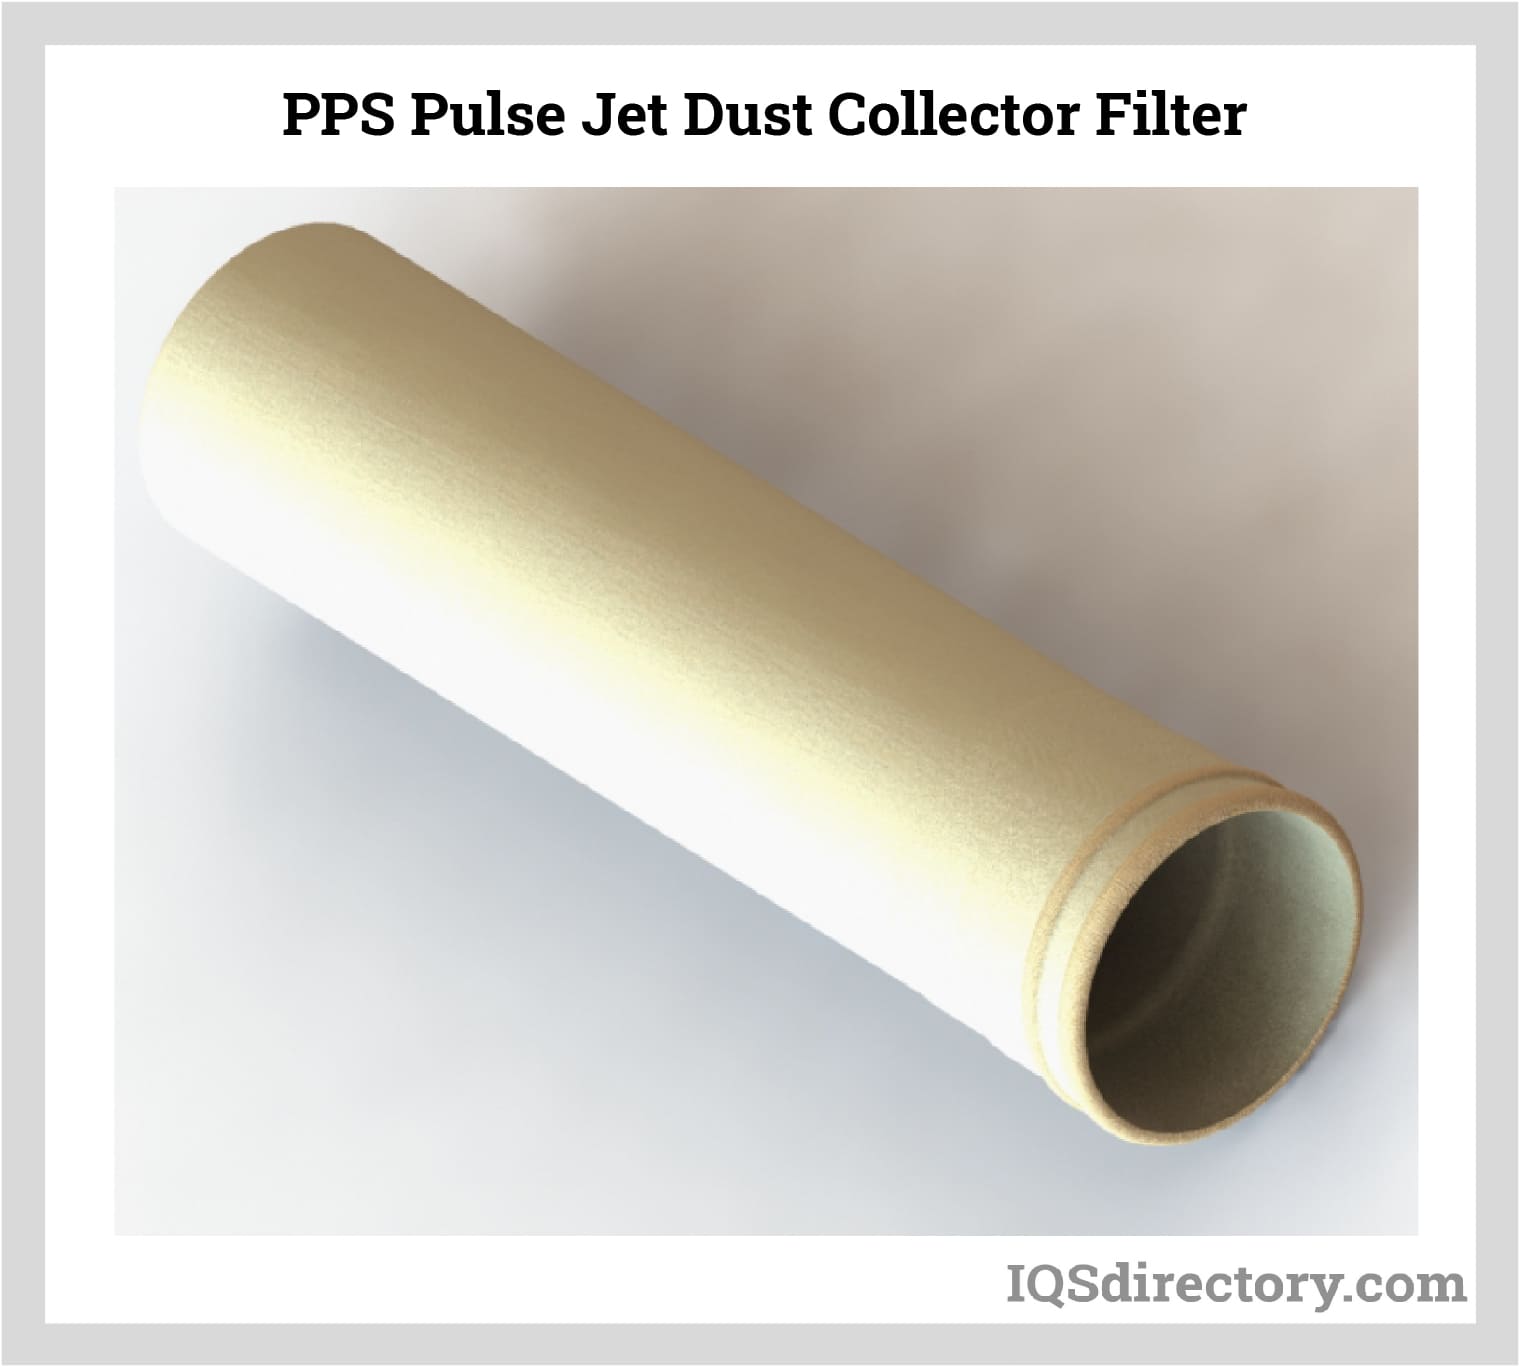 PPS Jet Dust Collector Filter